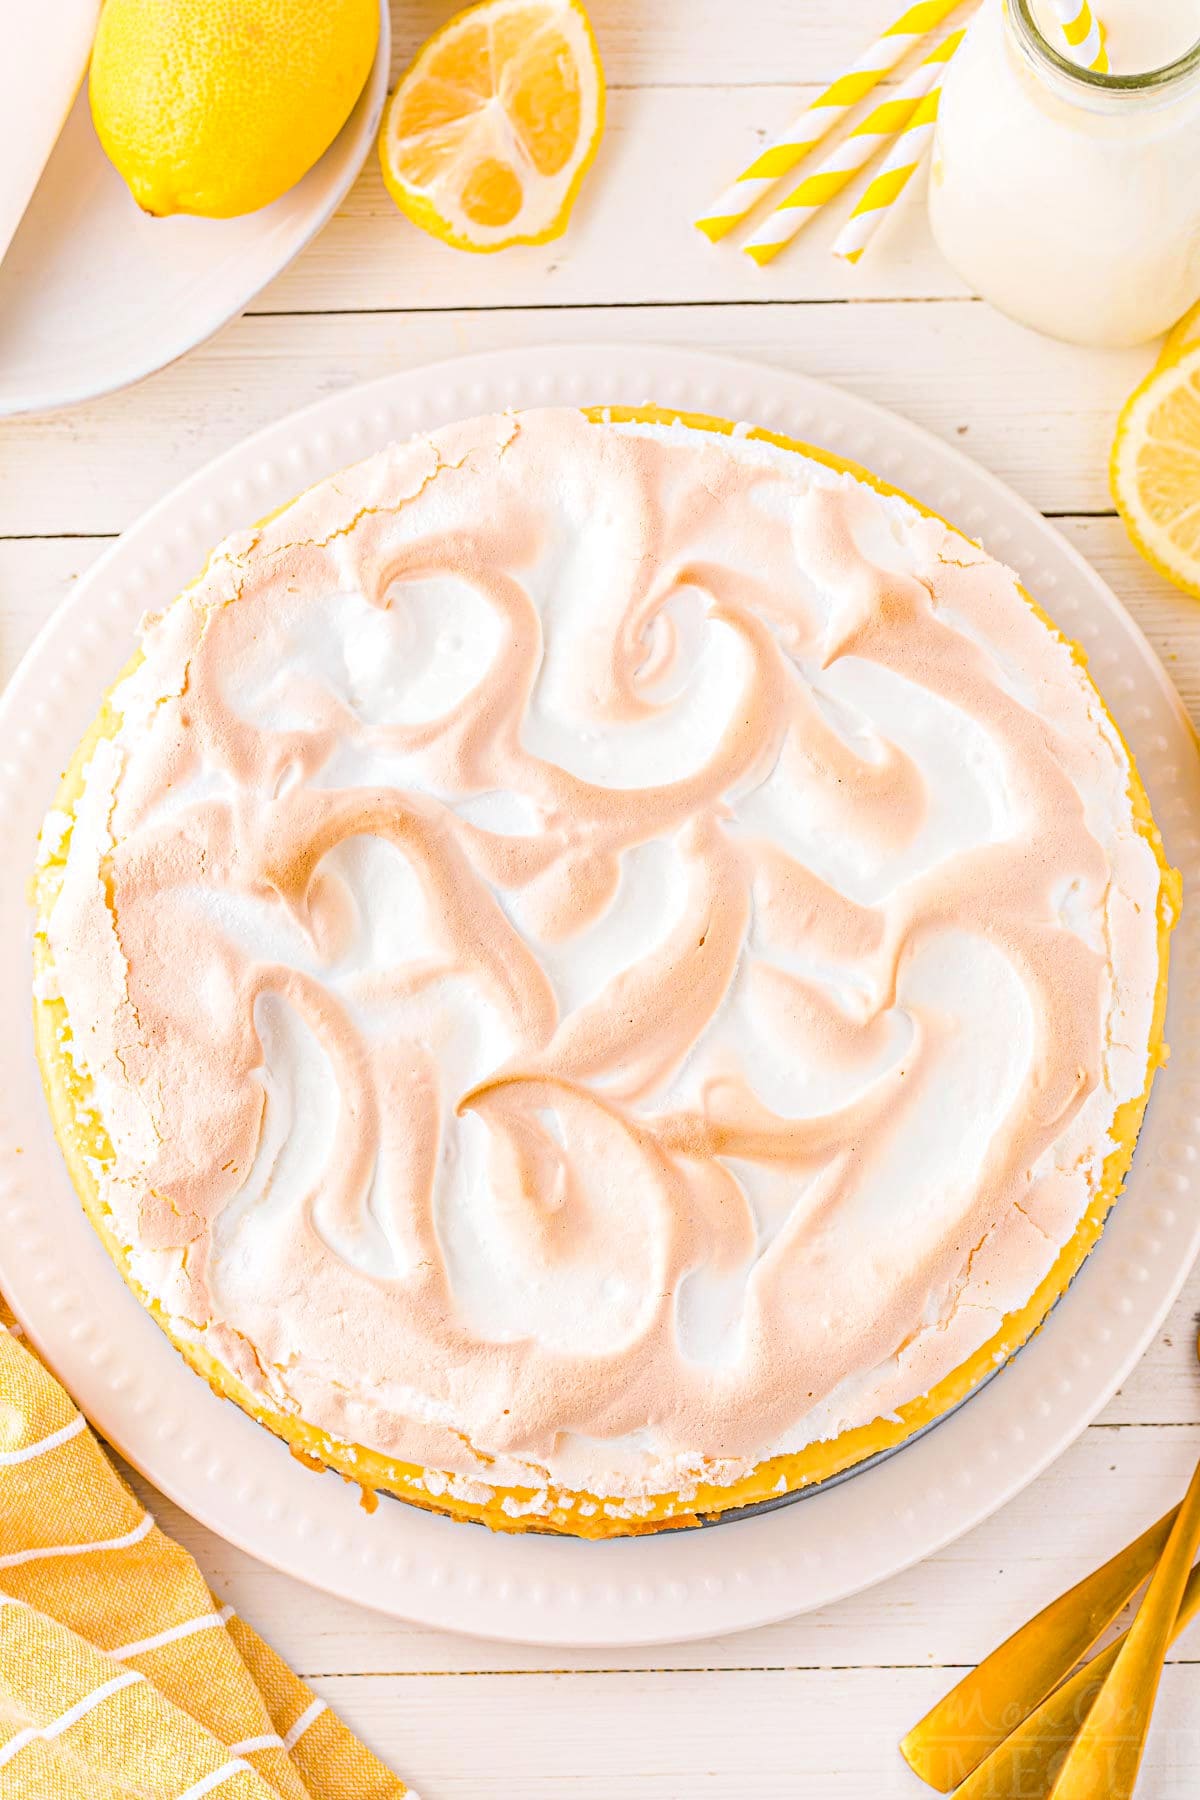 top down look at lemon cheesecake with a meringue topping. the meringue is beautifully swirled with golden brown tips. Lemon slices and wedges are around the cheesecake.